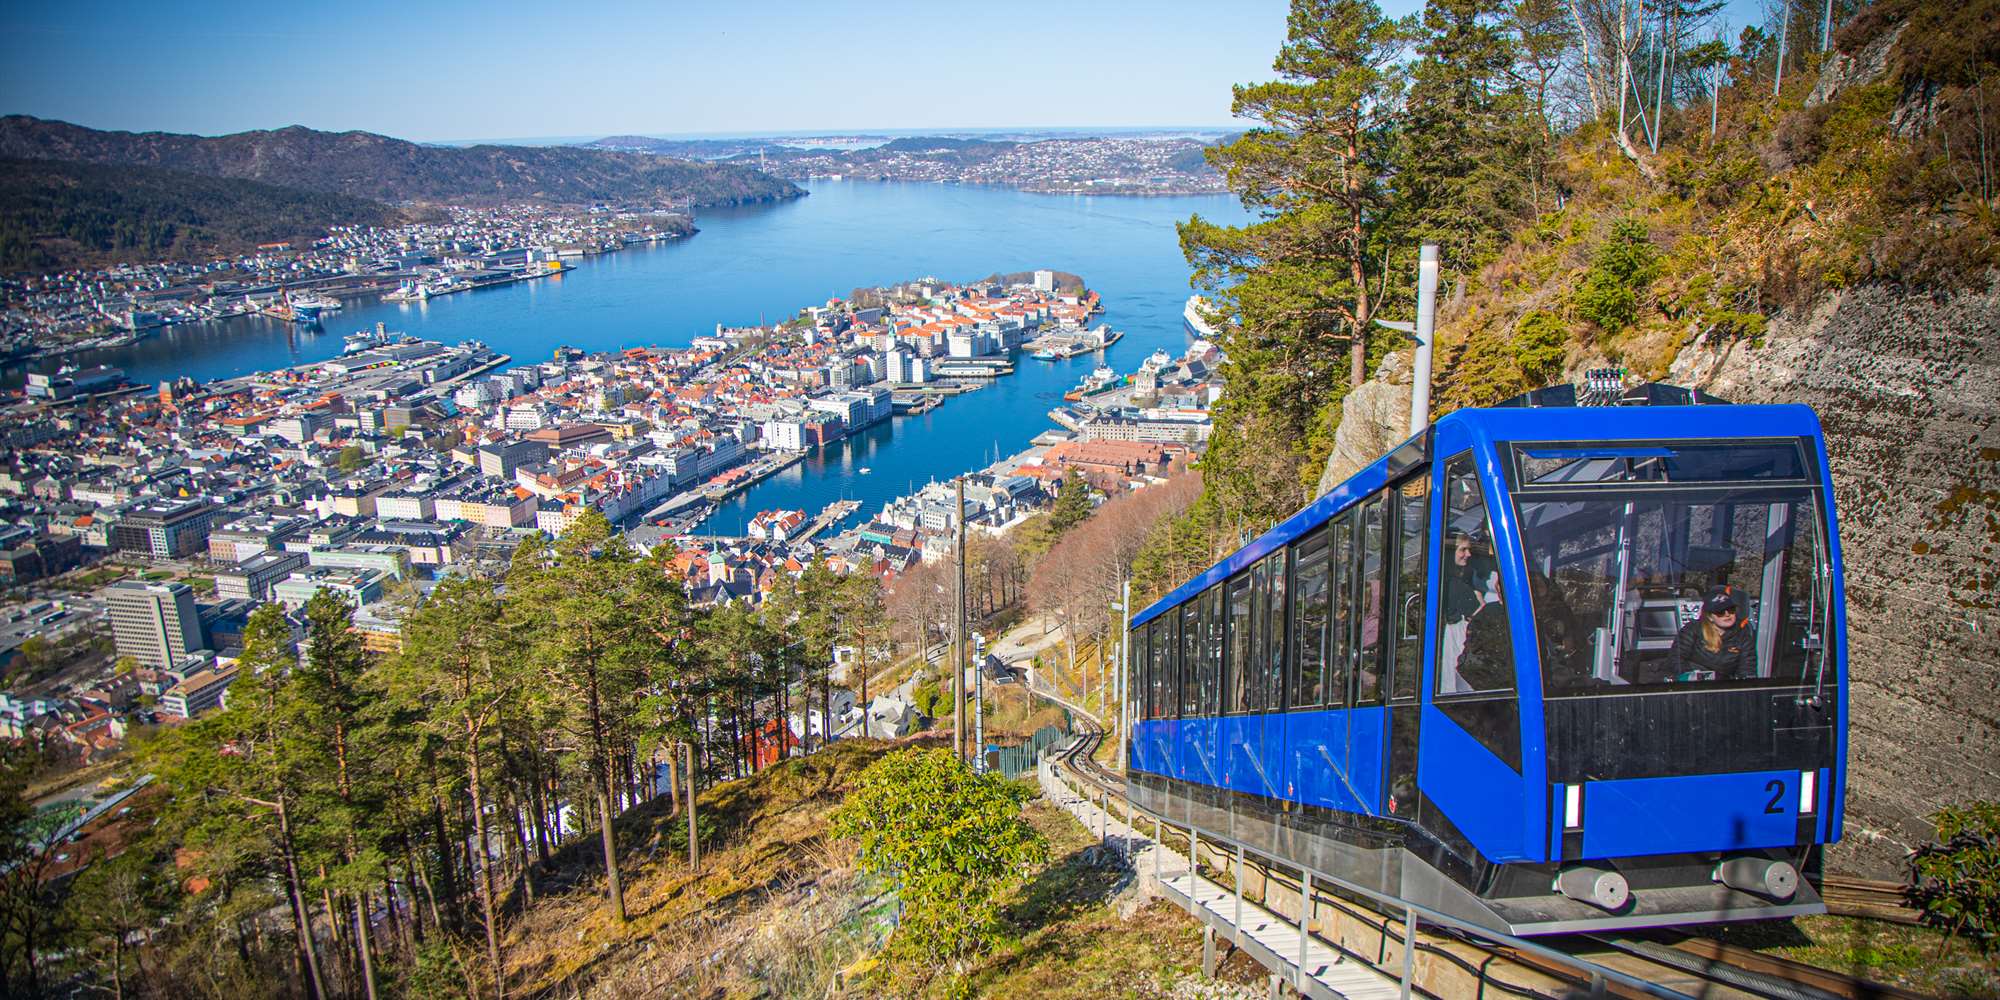 Fløibanen funicular - new carriages in 2022